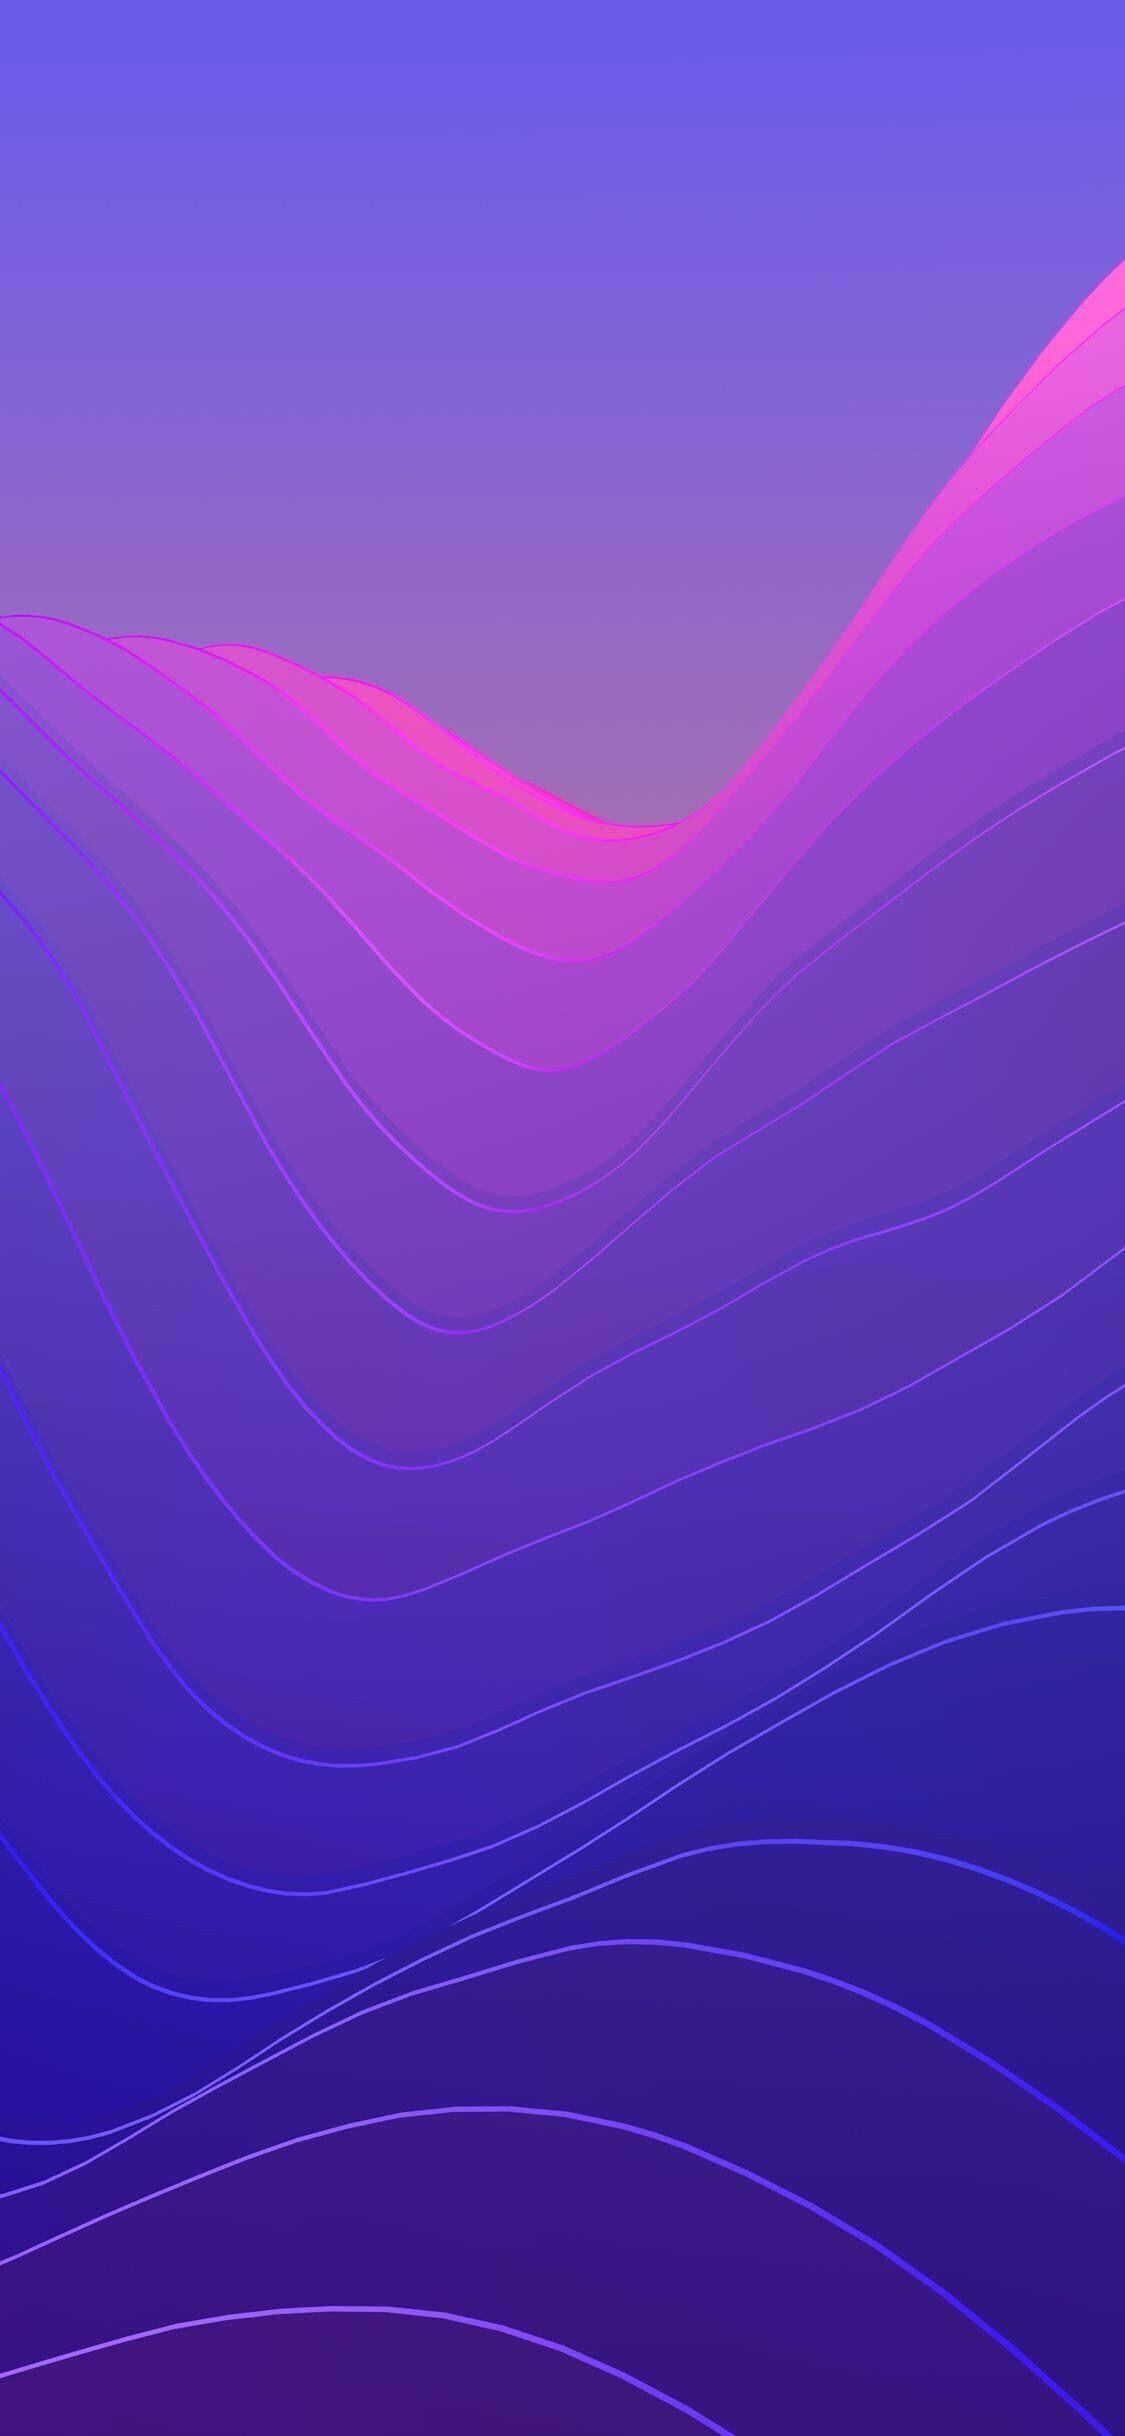 Violet and Blue Logo - iOS 11, iPhone X, purple, blue, clean, simple, abstract, apple ...